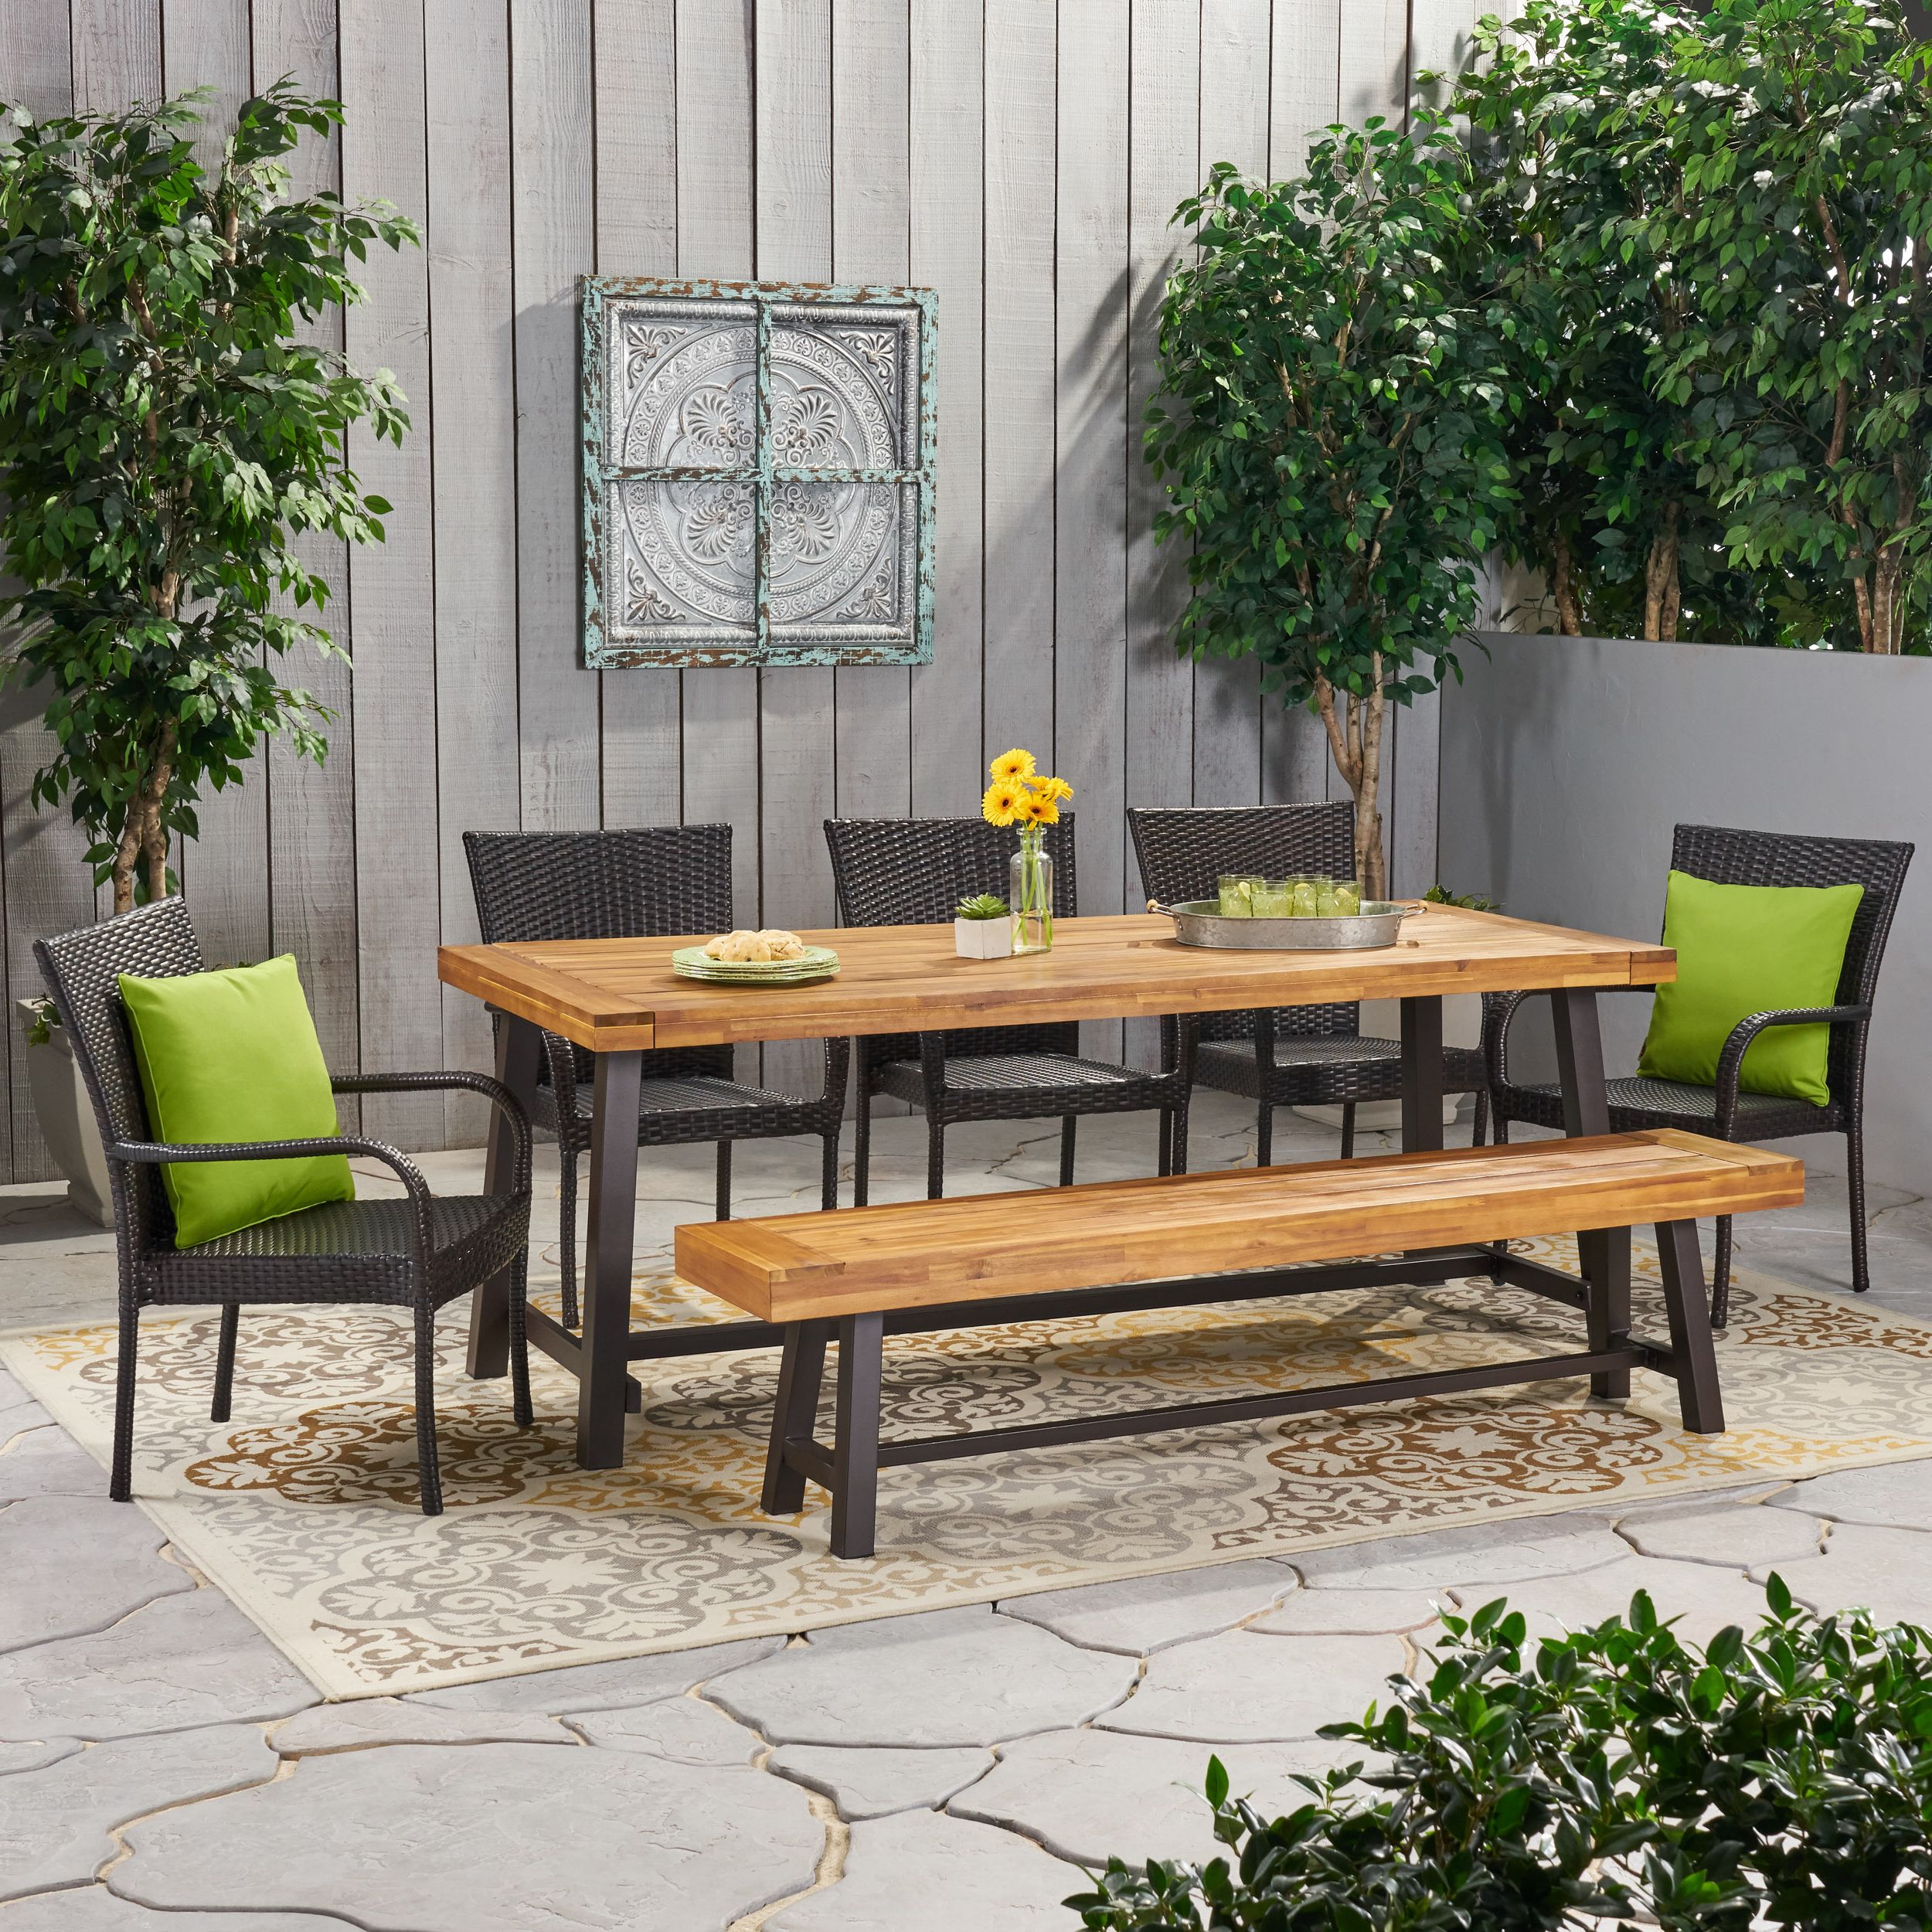 Famous Logan Outdoor Rustic Acacia Wood 8 Seater Dining Set With Dining Bench Regarding Acacia Wood Outdoor Seating Patio Sets (View 6 of 15)